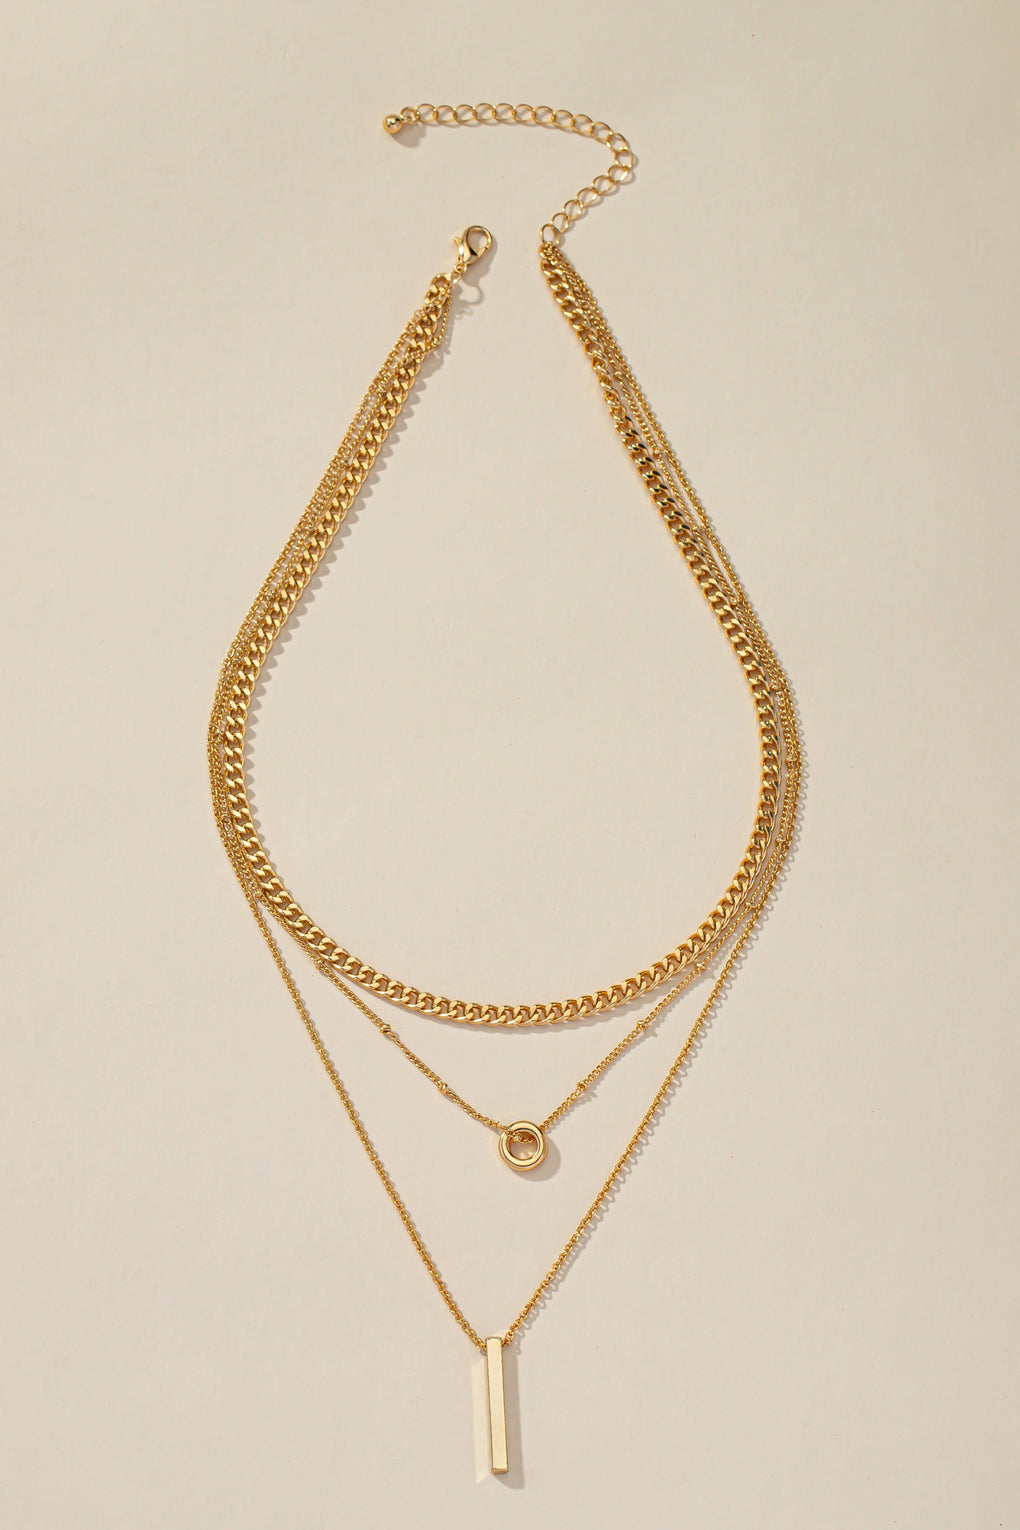 Triple layer necklace with gold bar